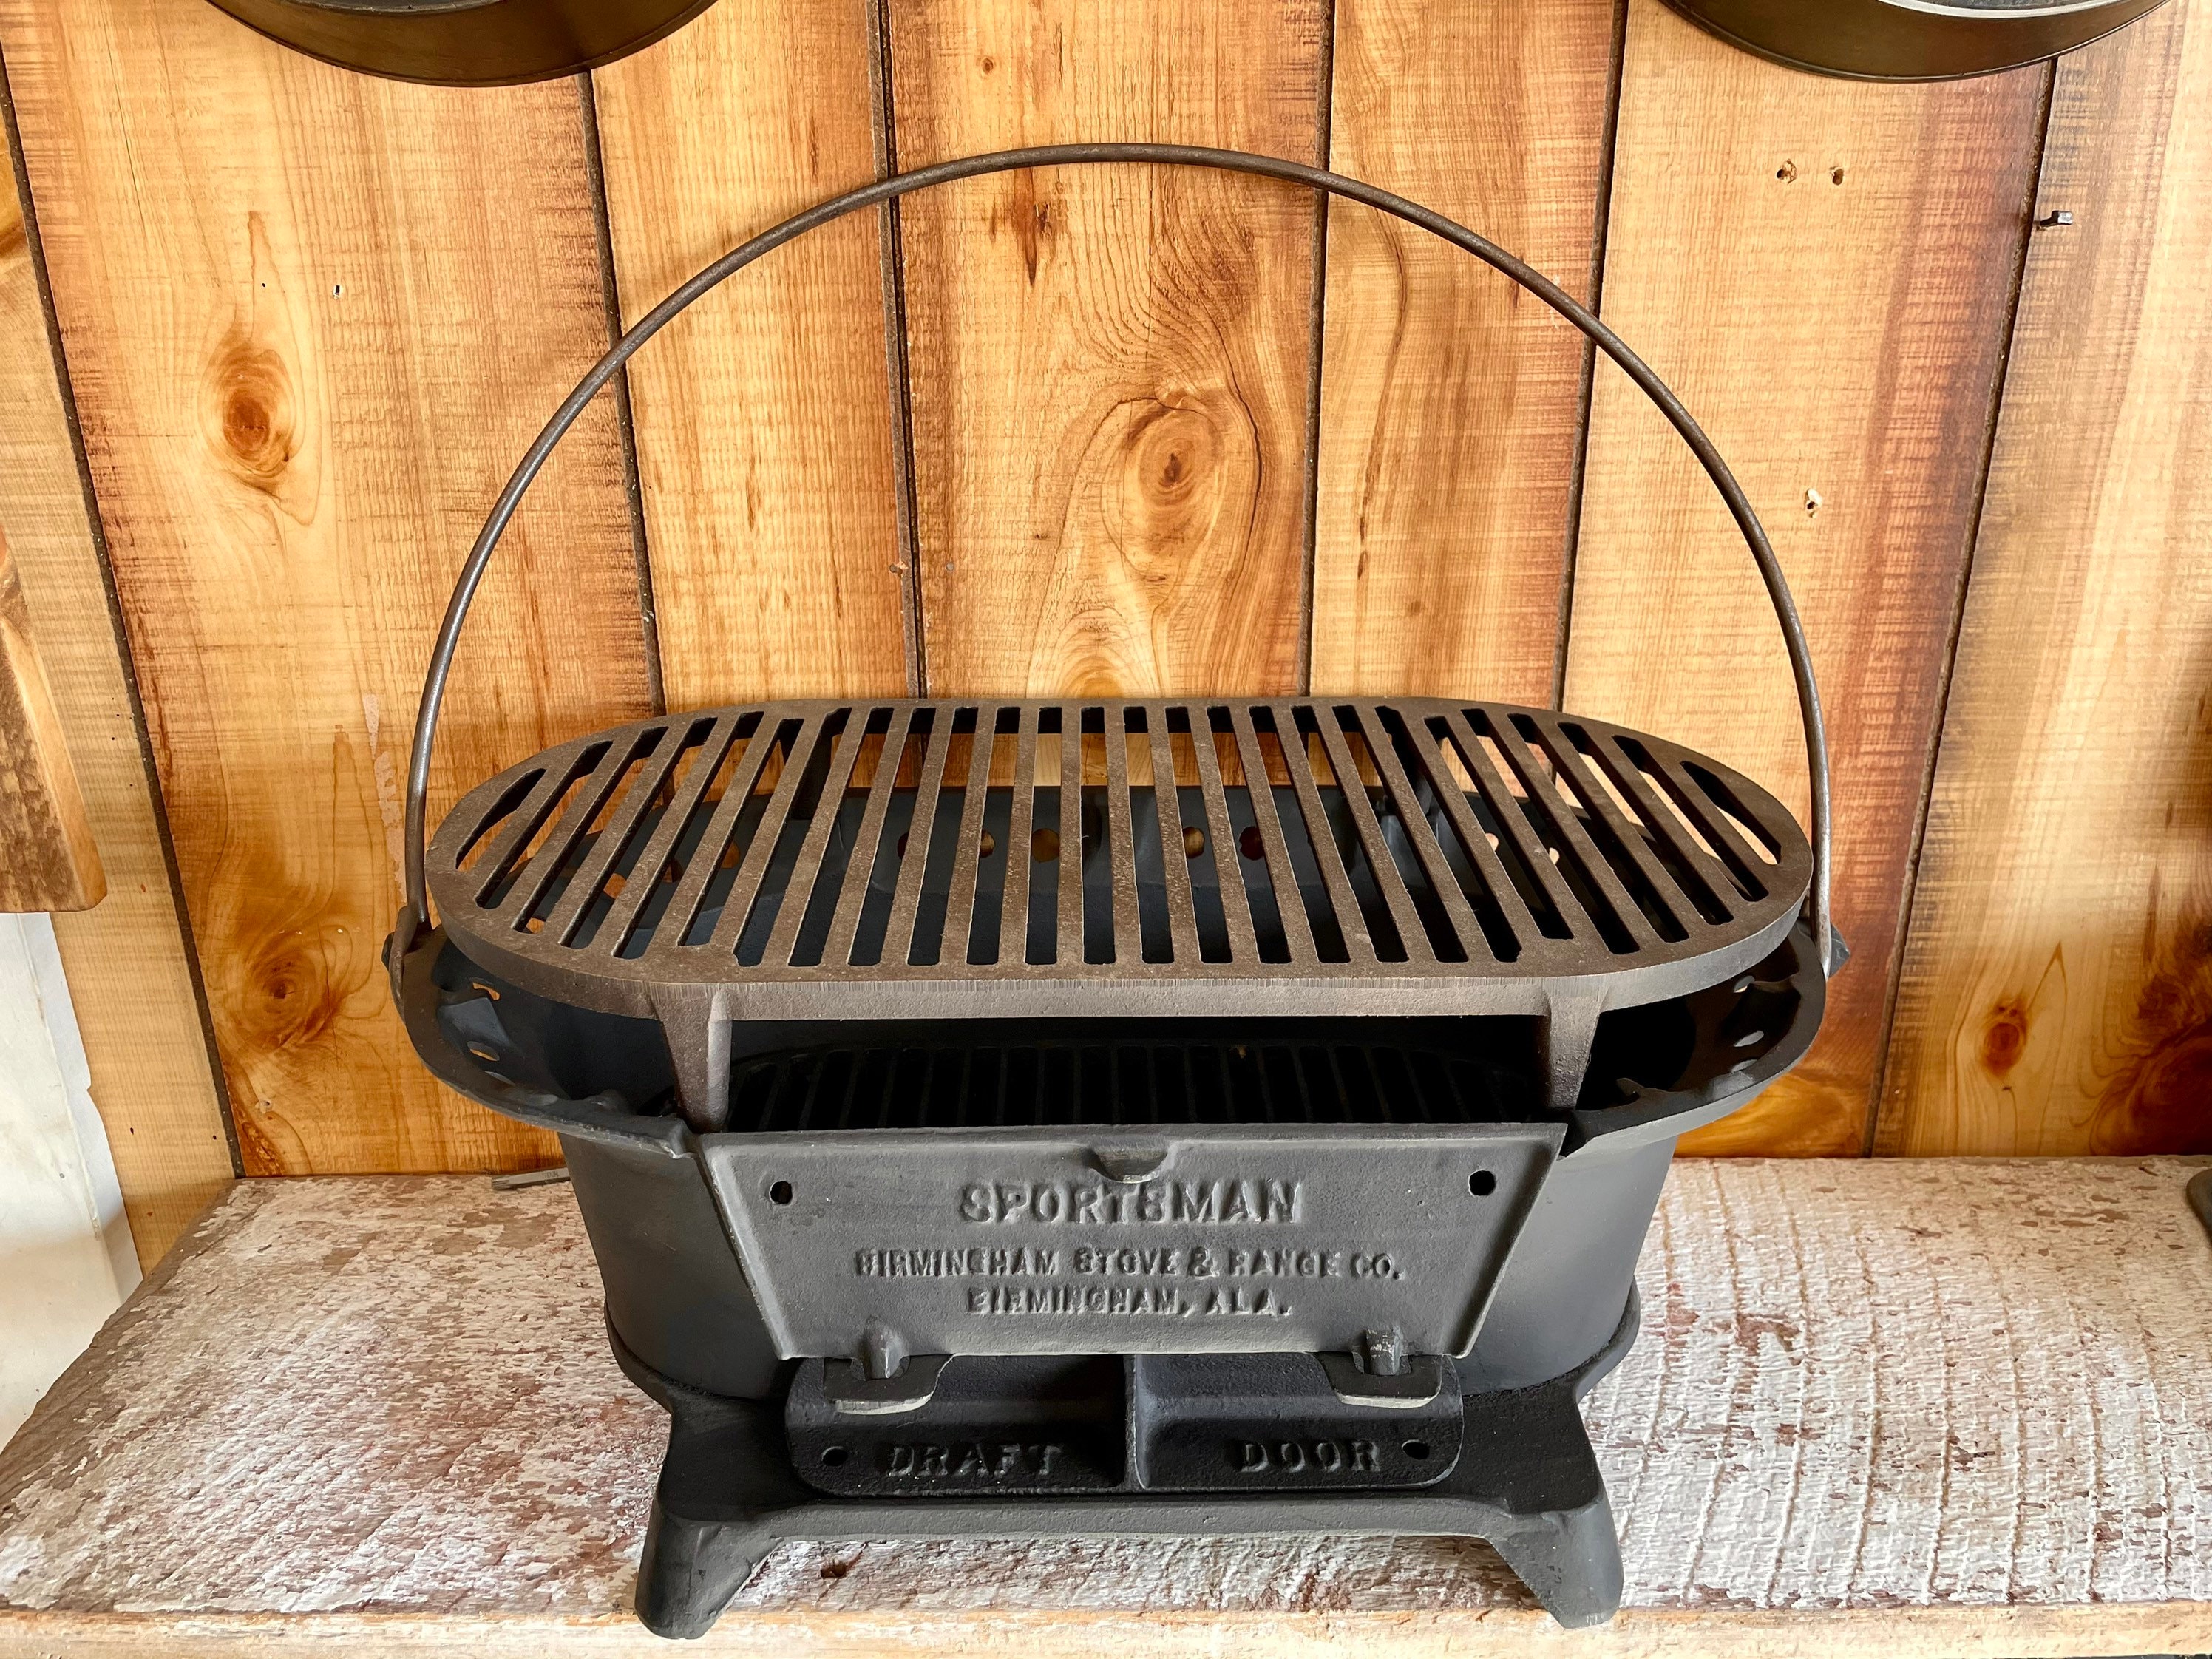 Sportsman's Grill Cover